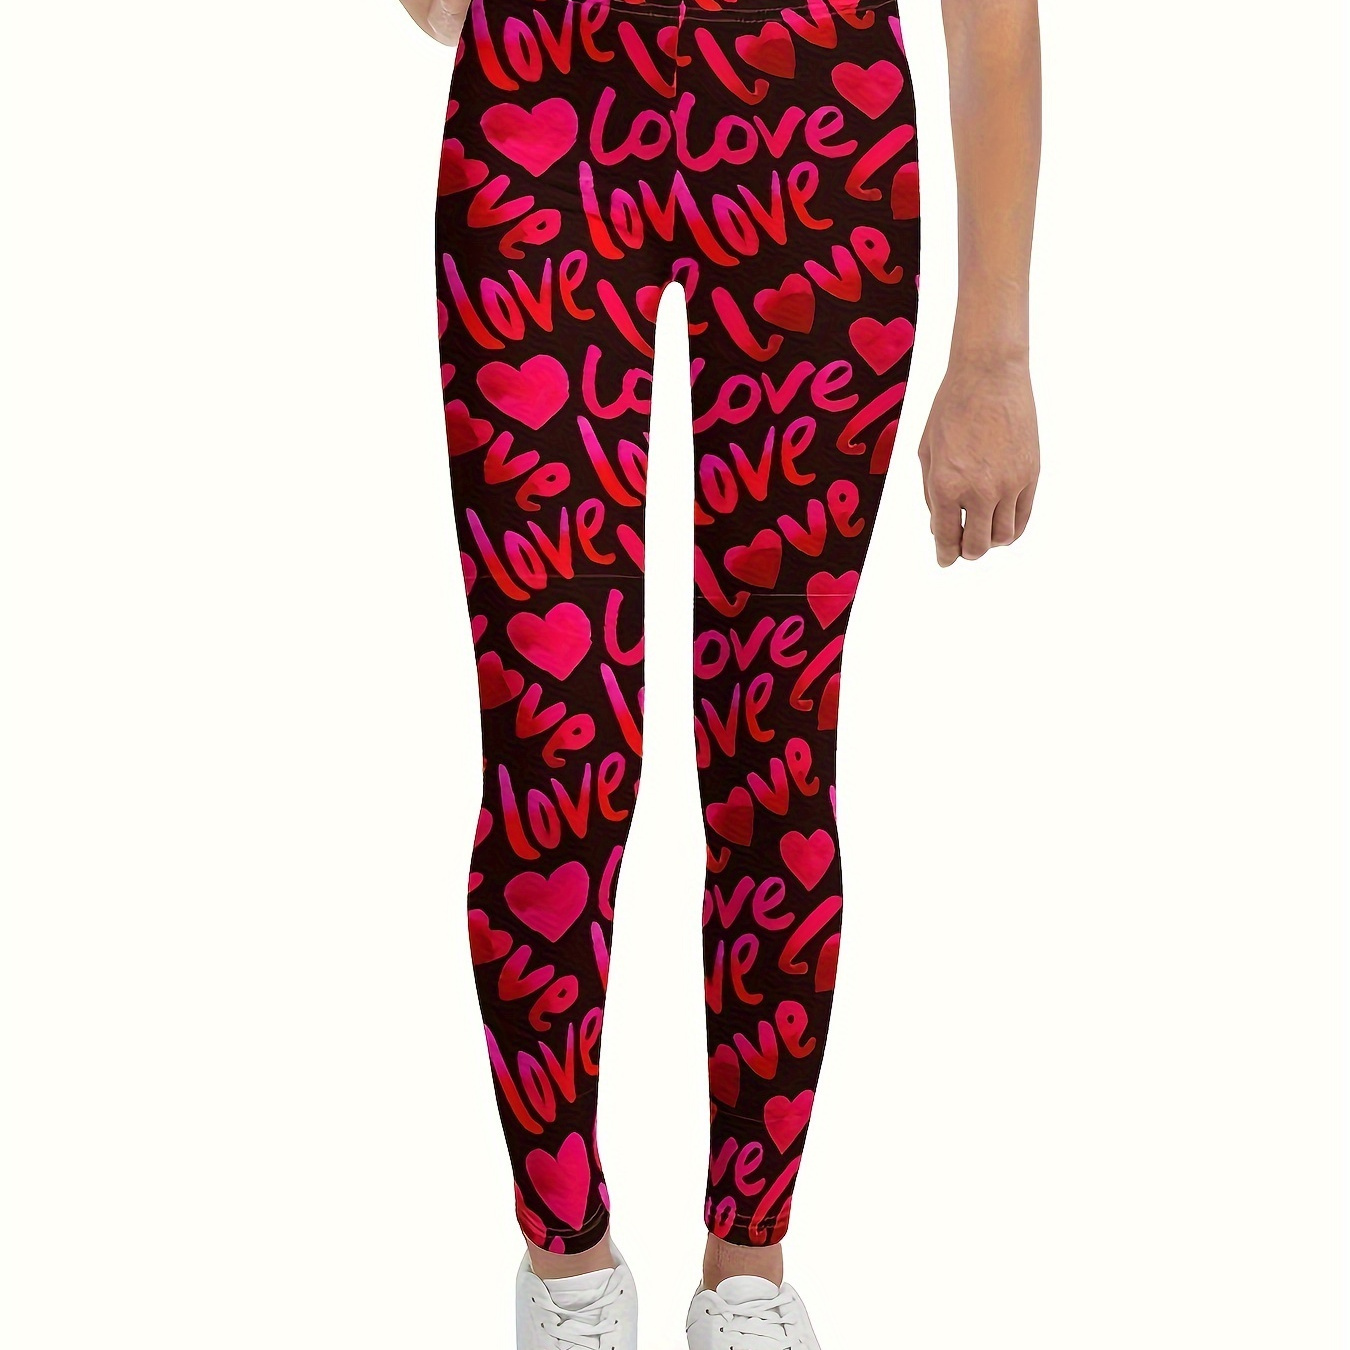 TWIFER Valentines Day Gift Sets Women's Legging Women Yoga Leggings  Valentine Day Printing Casual Comfortable Home Leggings